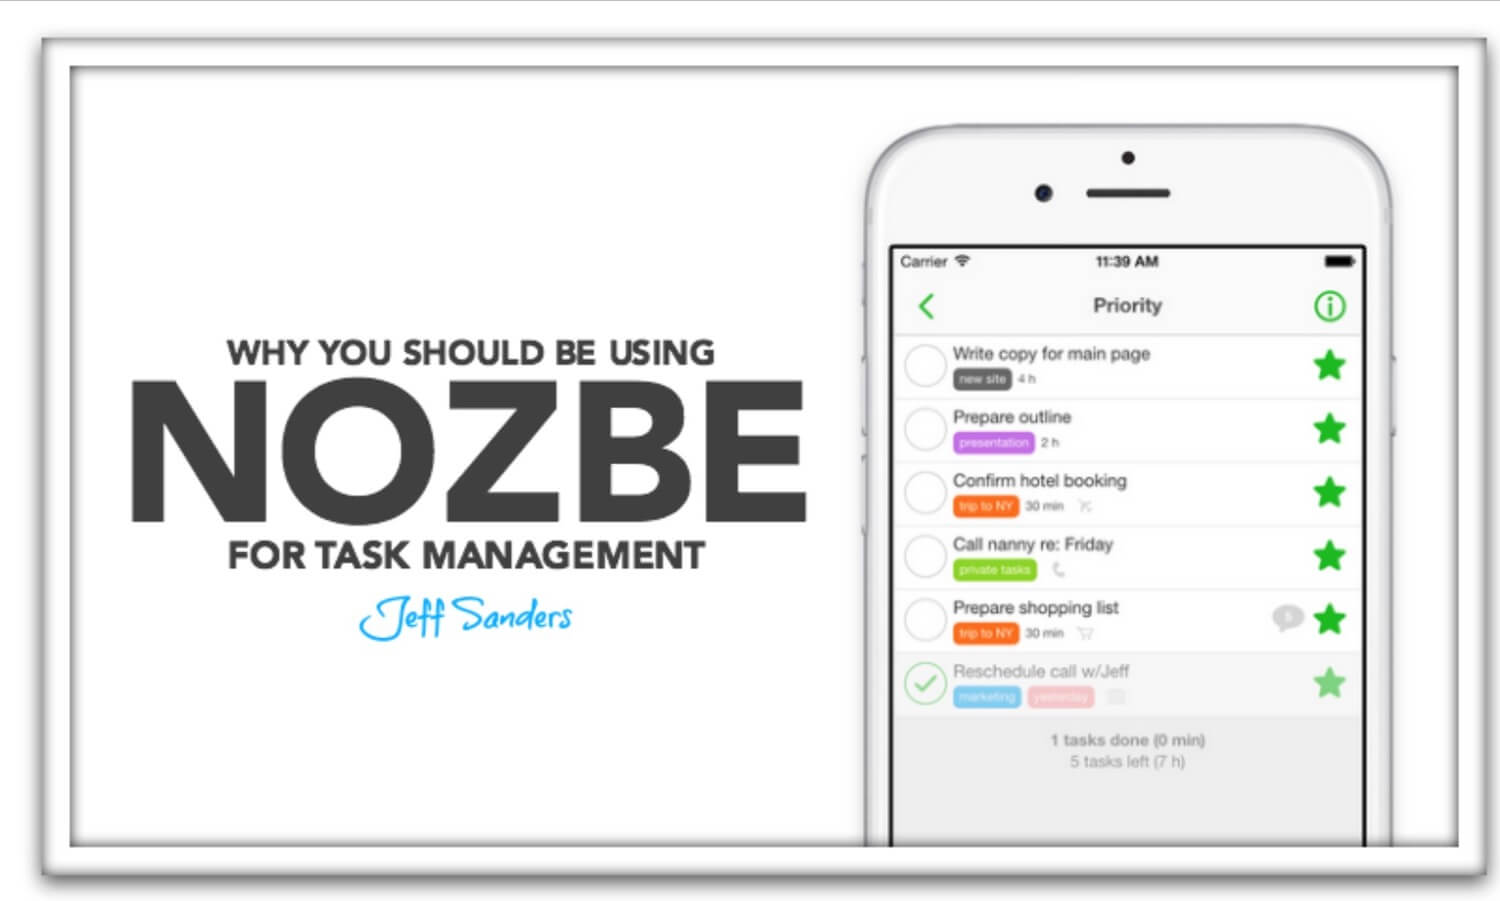 Why You Should Be Using Nozbe for Task Management [on: Jeff Sanders 5am Podcast]